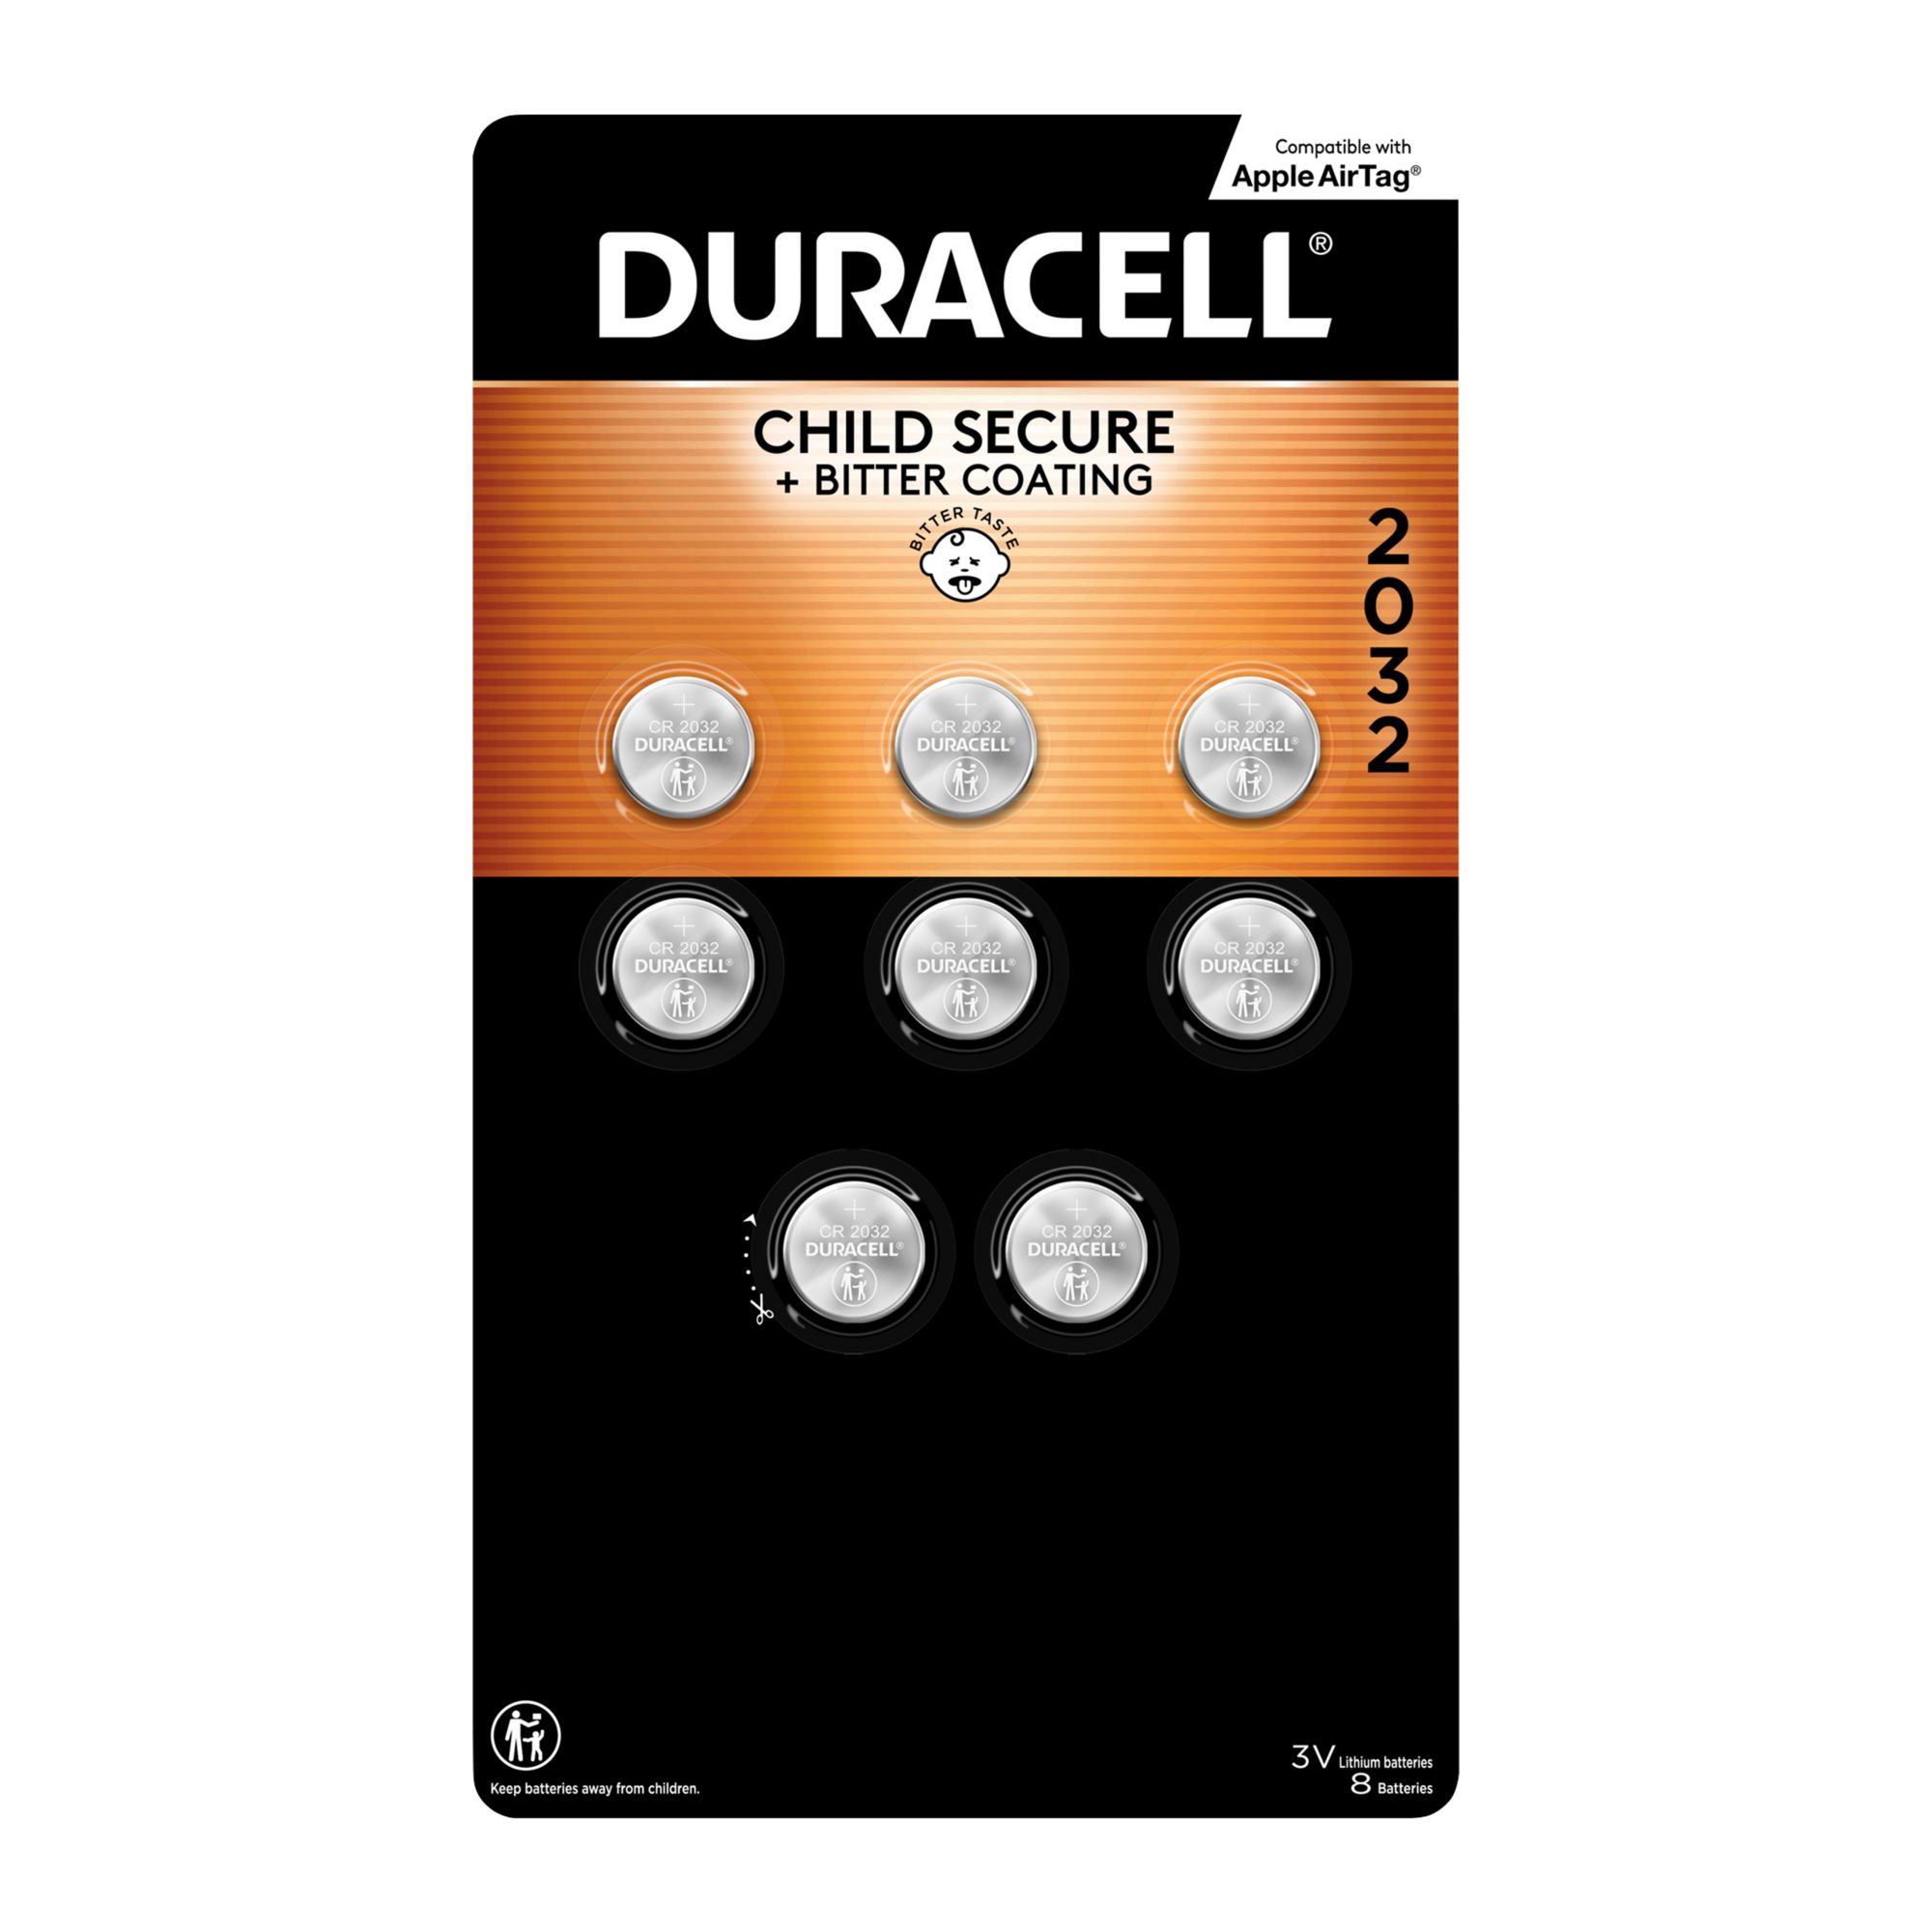 Duracell 2032 3V Lithium Coin Battery, 8/Pack